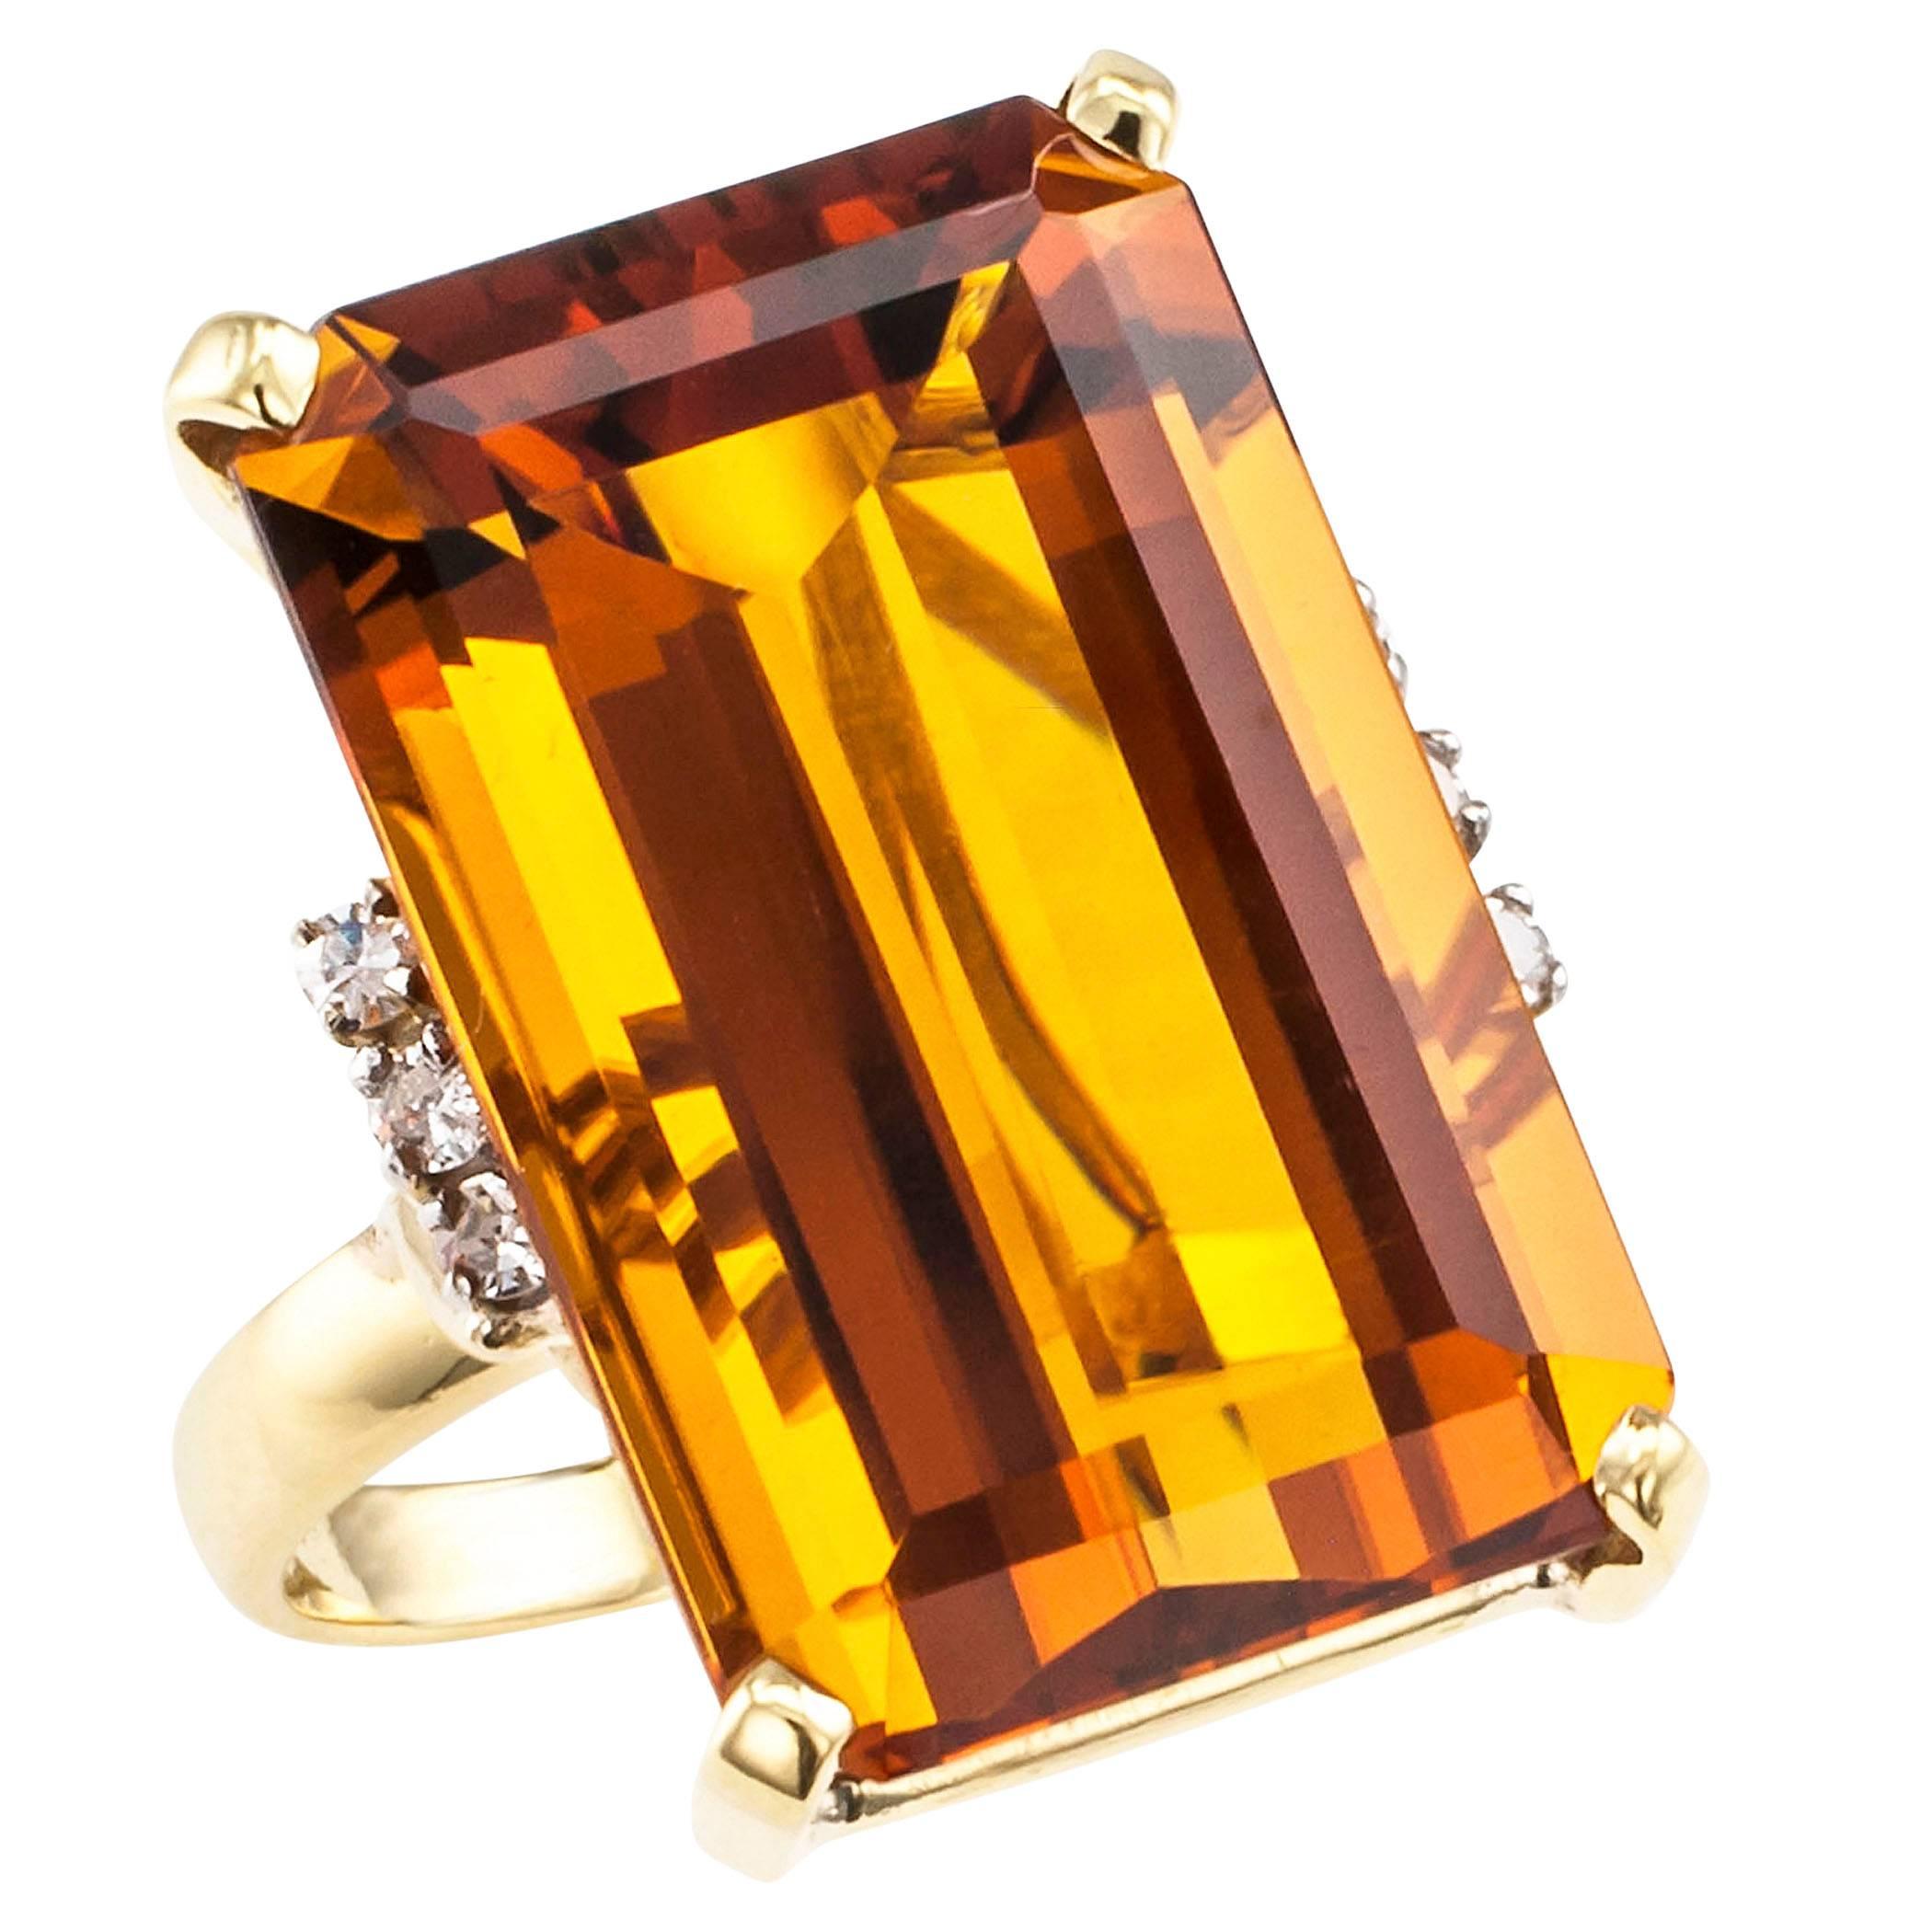 Emerald cut Madeira citrine diamond gold cocktail ring circa 1970. Centering upon an emerald-cut Madeira citrine weighing 23.91 carats, between shoulders set with six round diamonds totaling approximately 0.15 carat, mounted in 18-karat yellow gold.